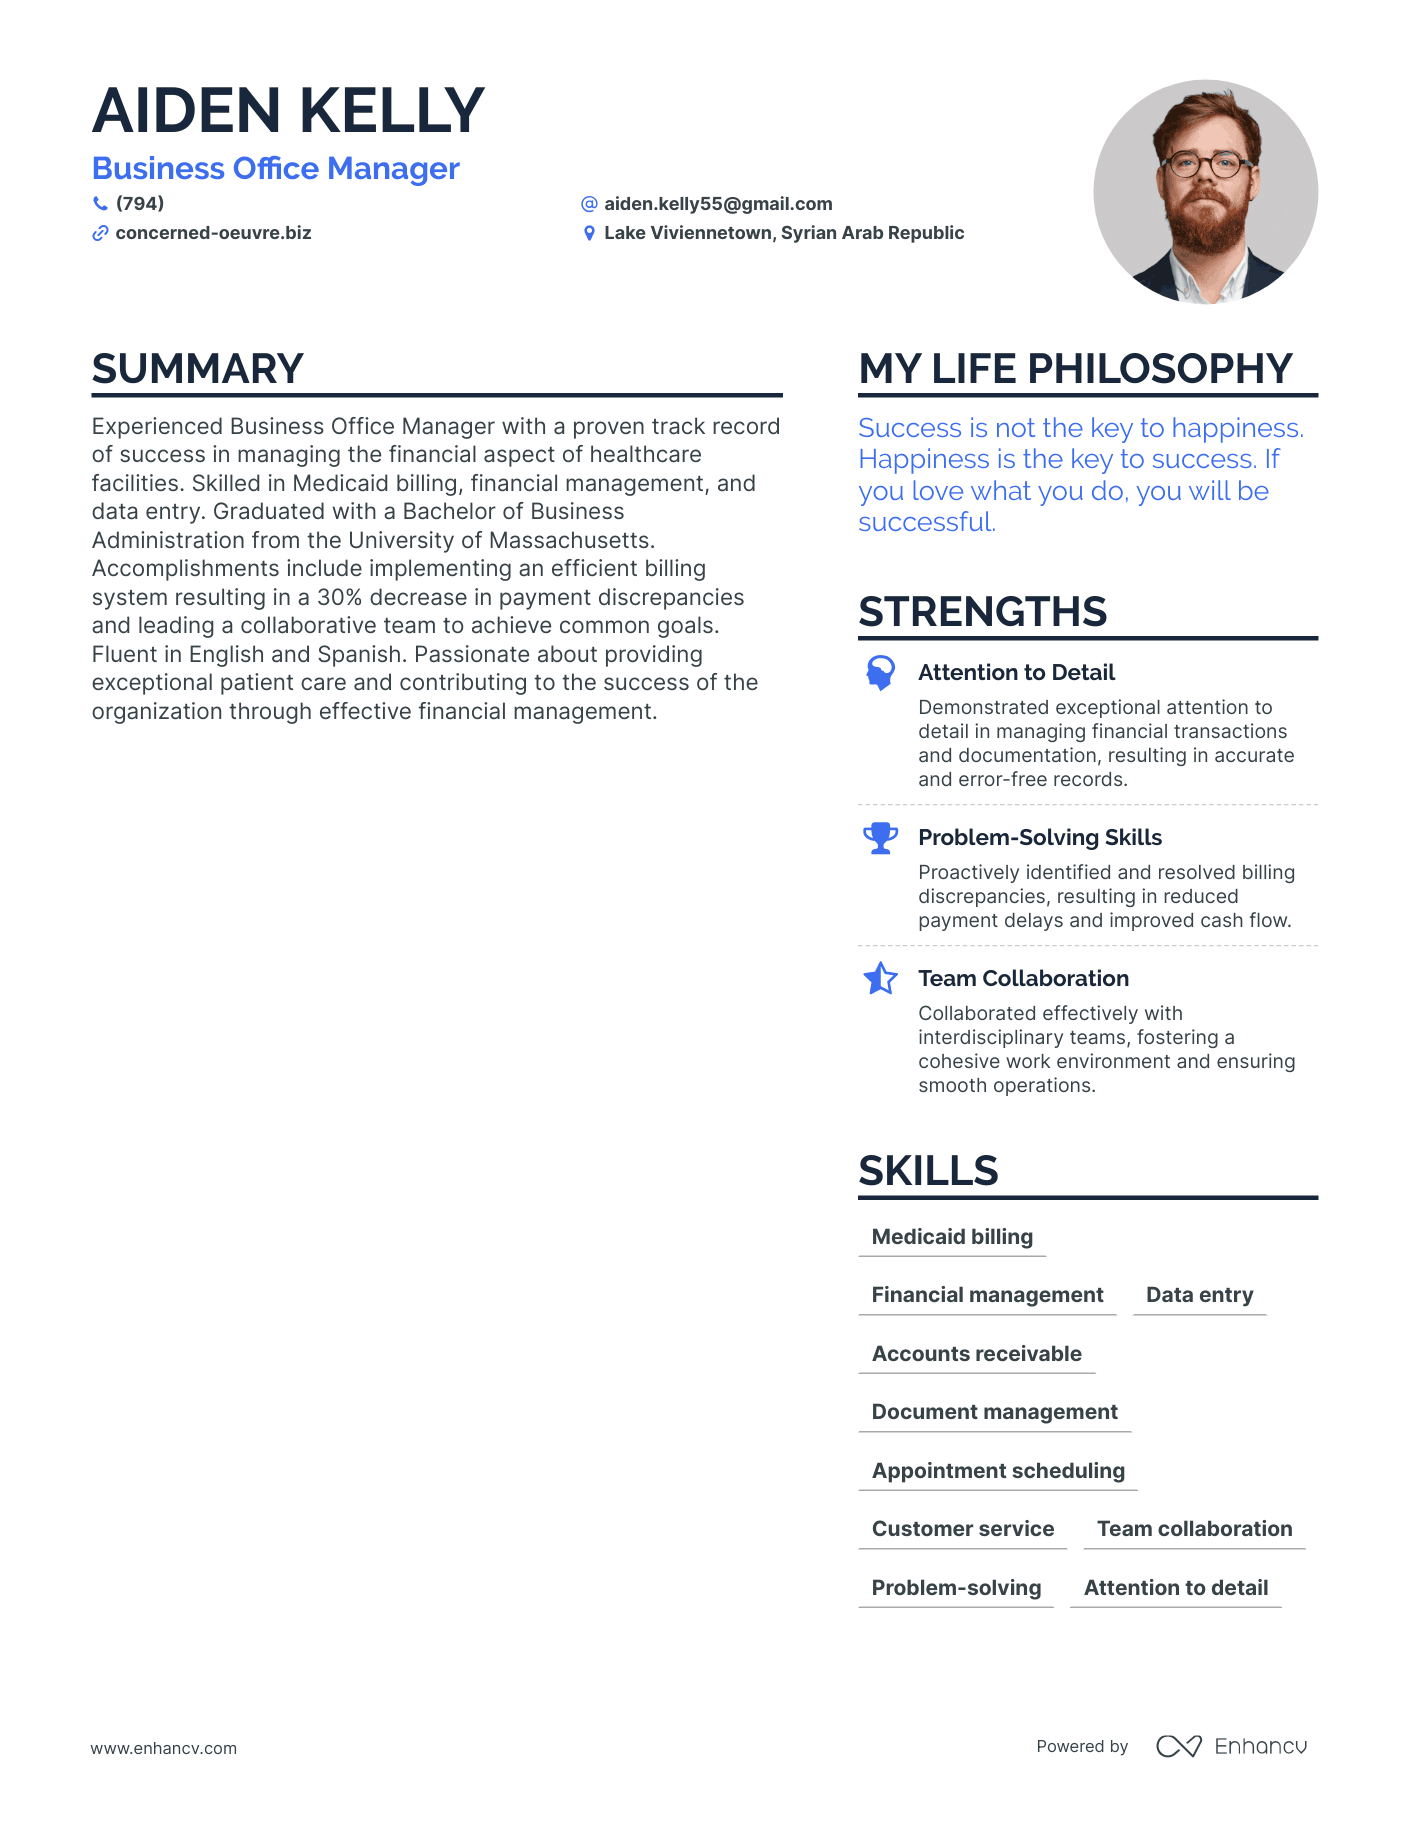 Business Office Manager resume example